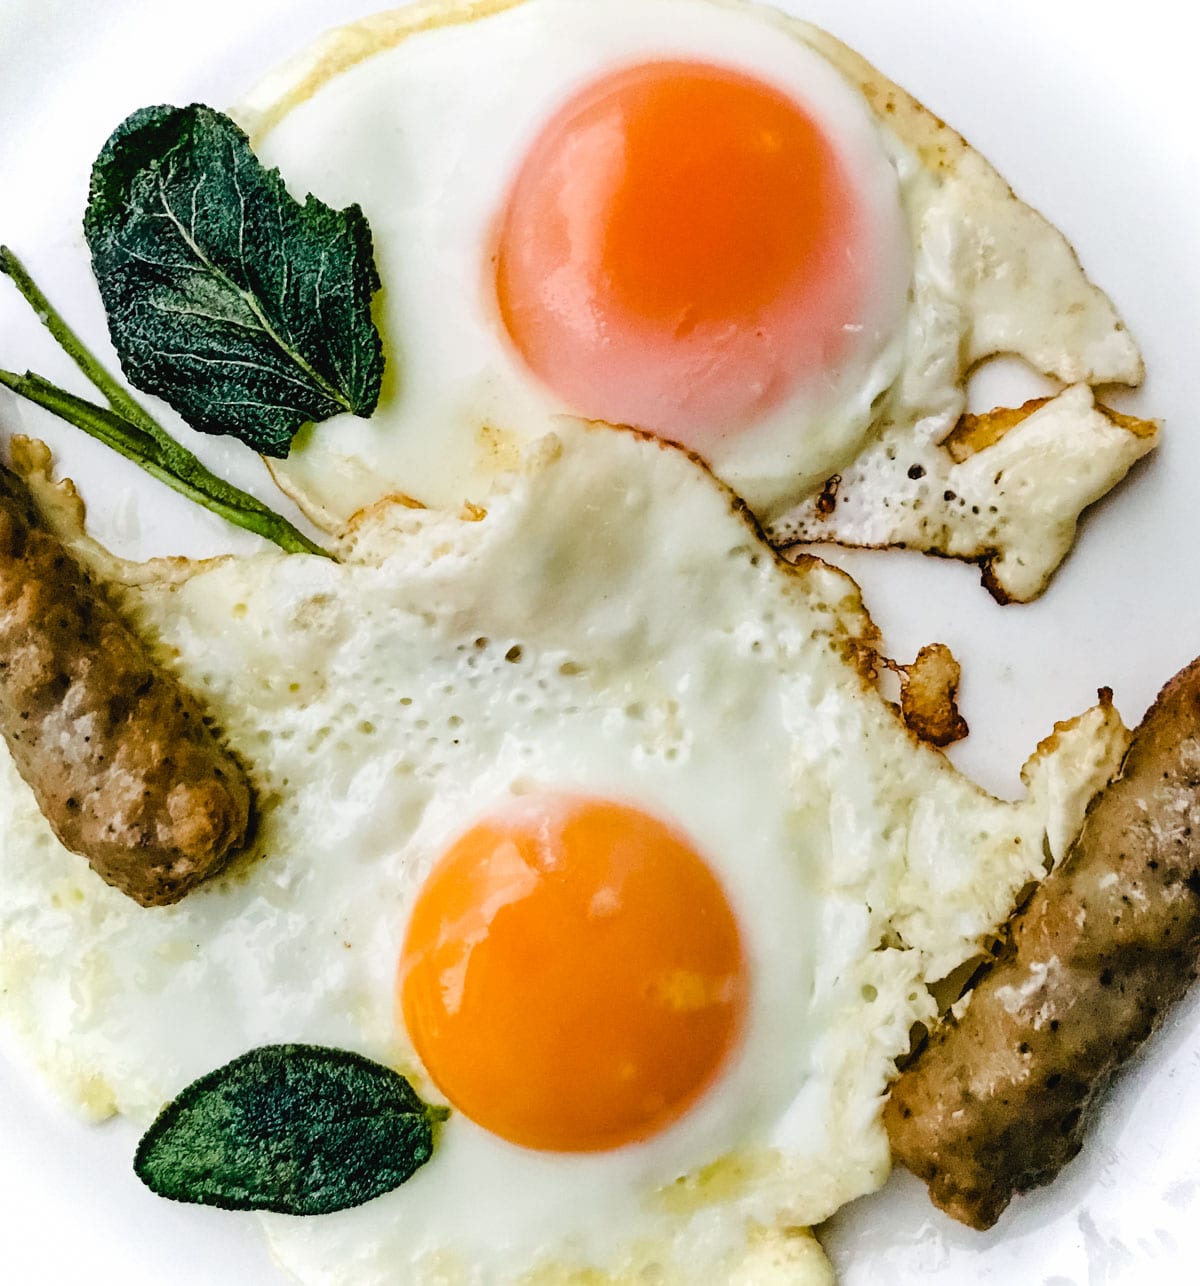 A plate of sunny side up eggs with crispy whole sage leaves and breakfast sausage links